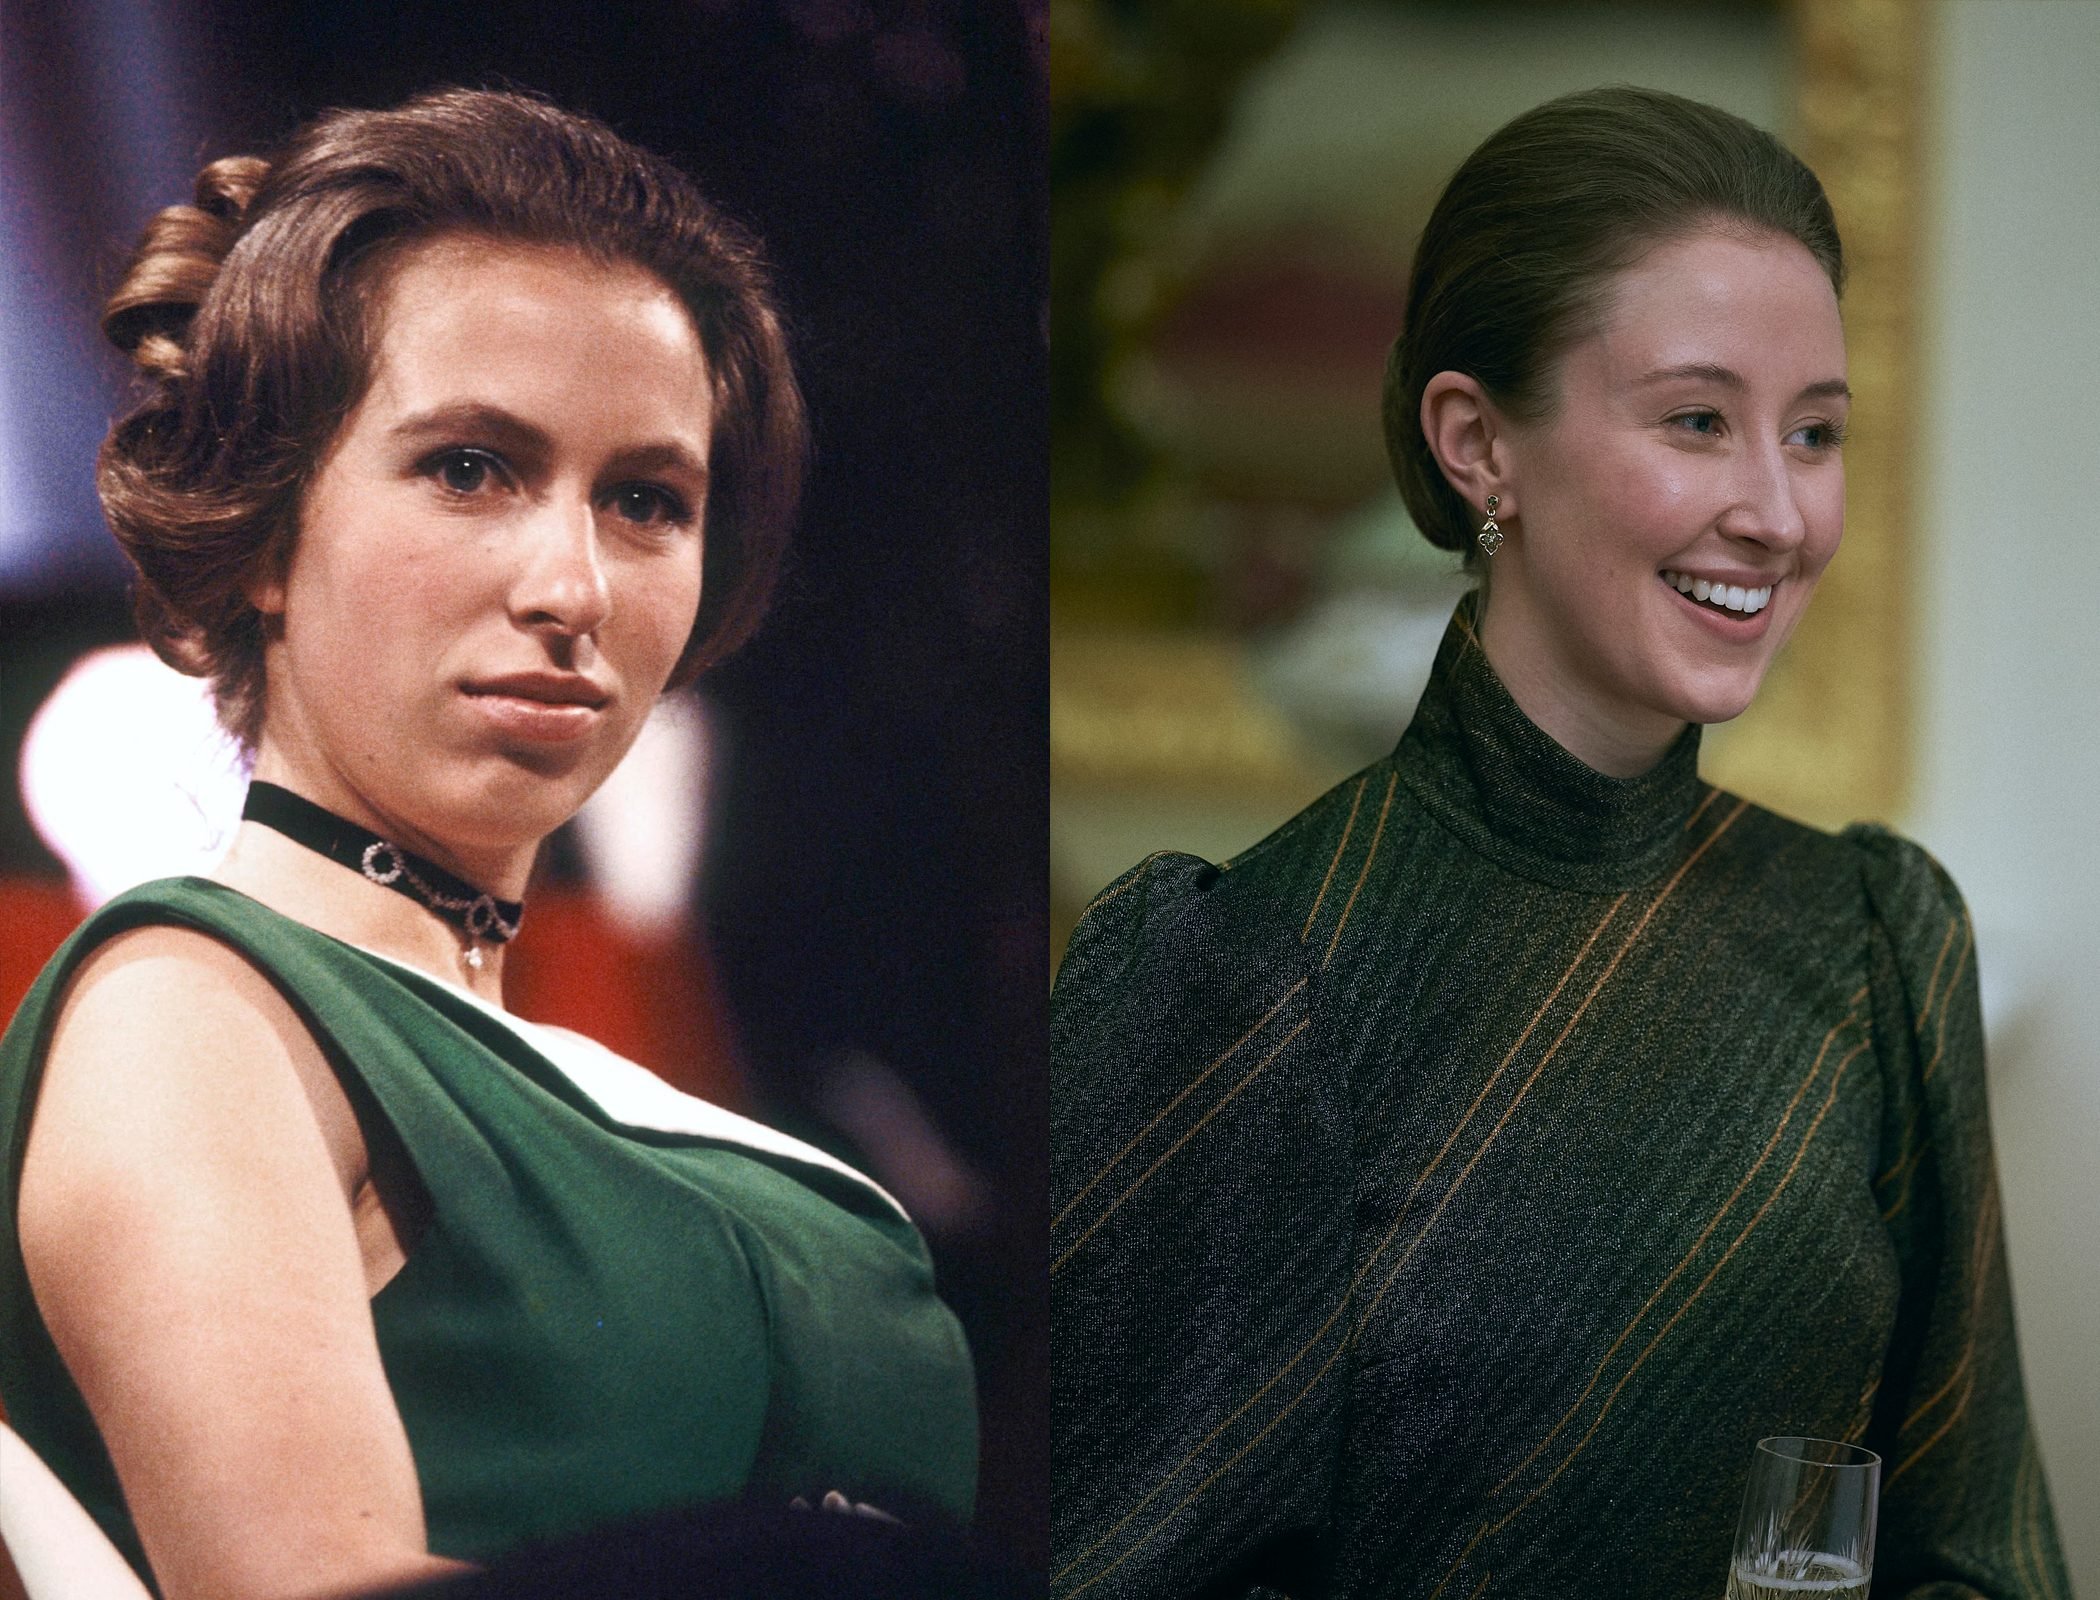 Princess Anne, as played by Erin Doherty